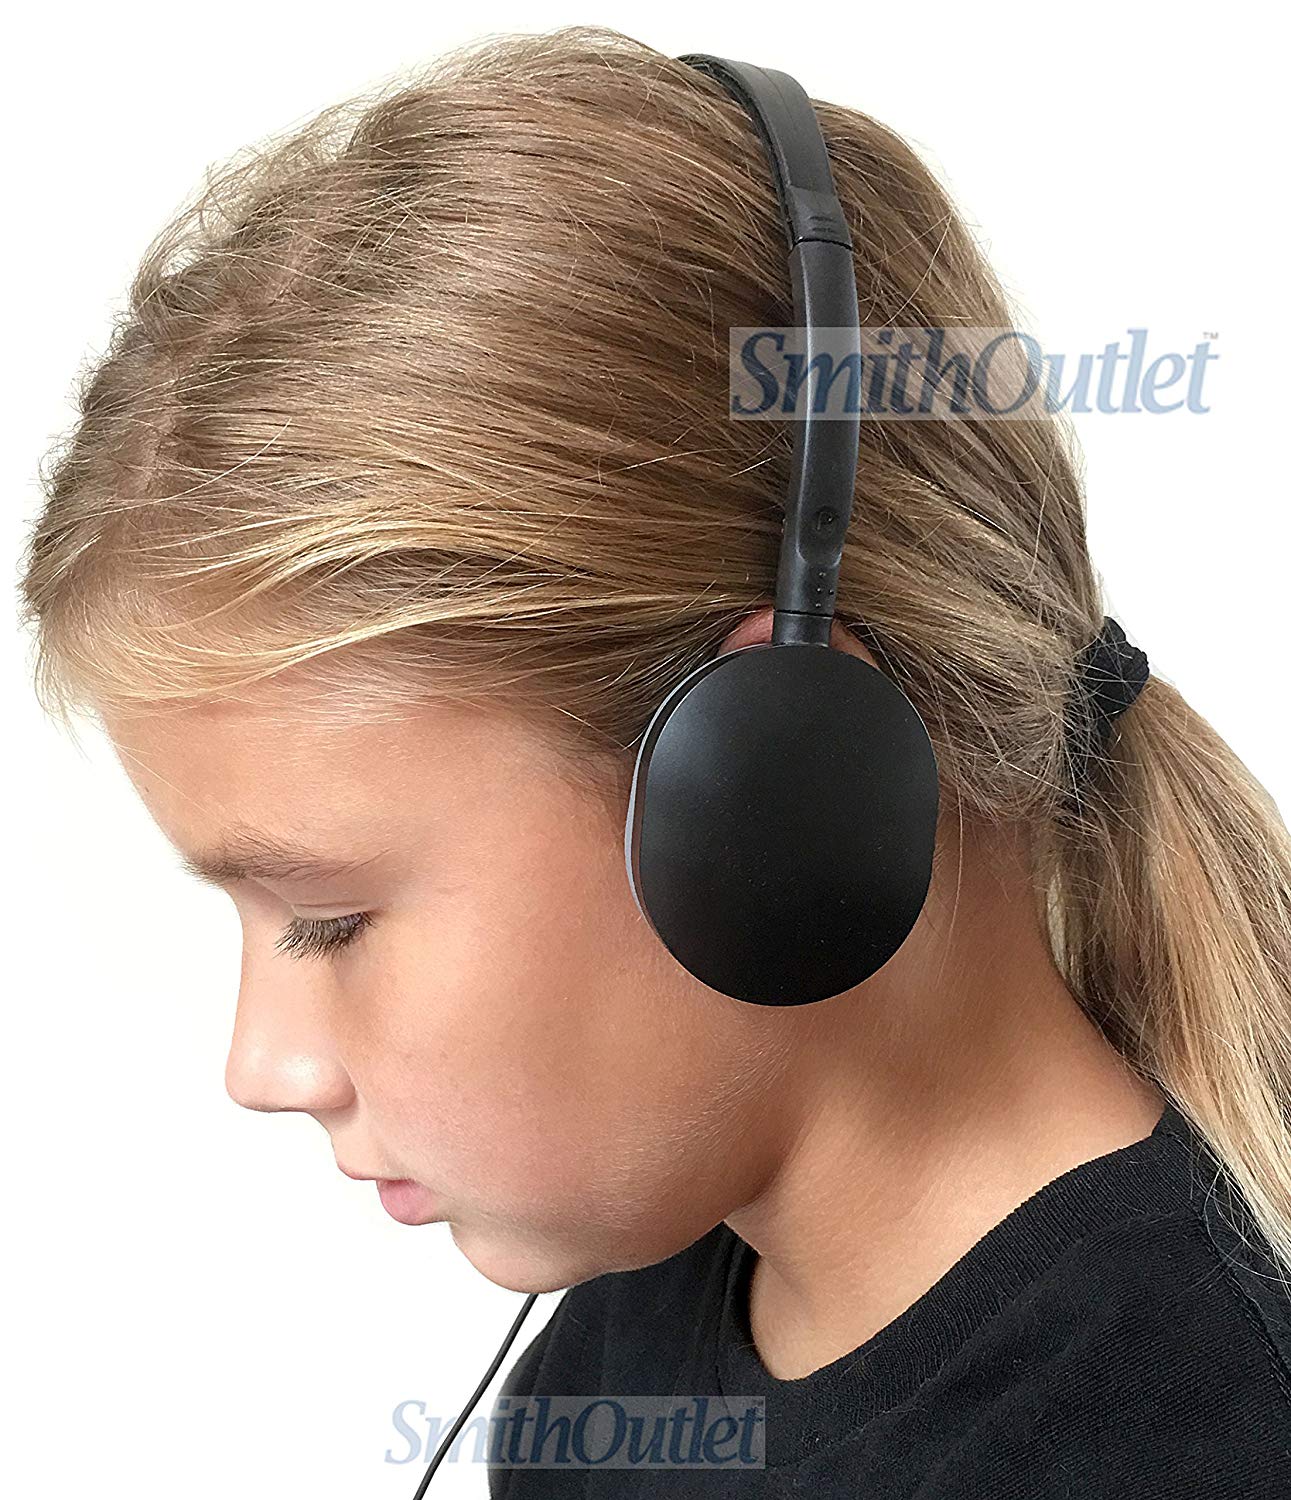 Students Wearing SmithOutlet Rubber Earpad Headphones in Classroom Setting